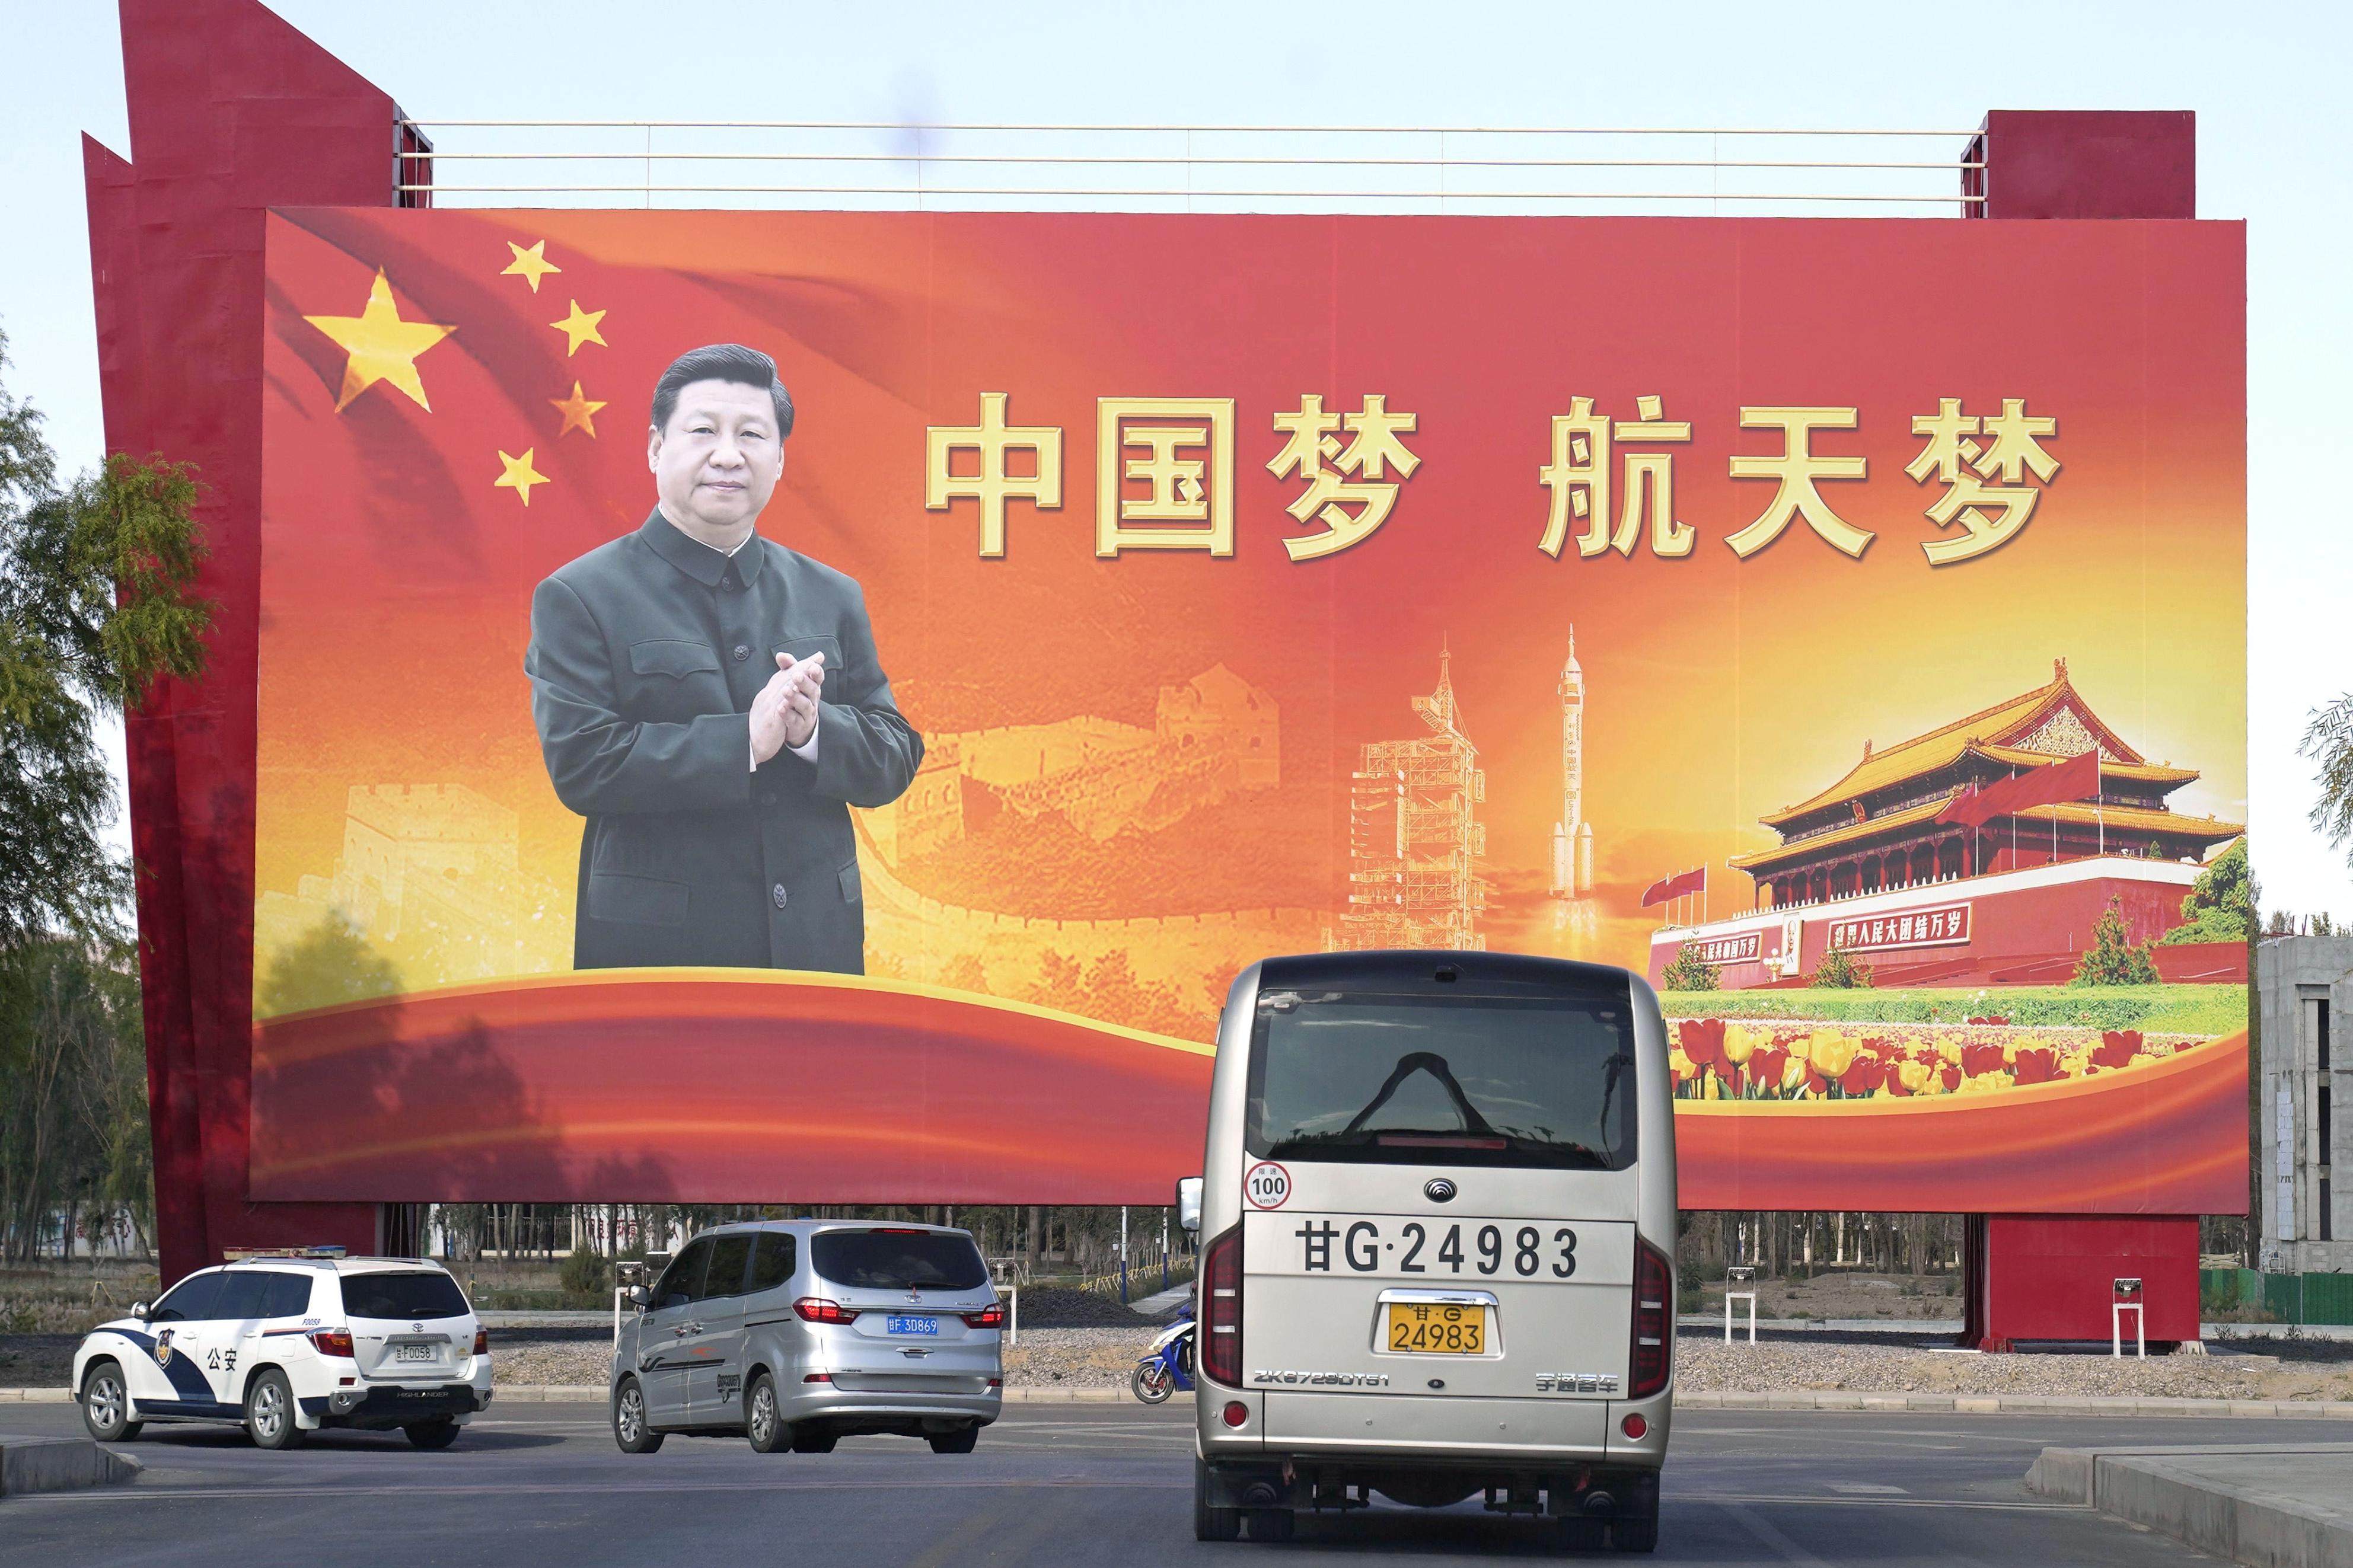 Chinese President Xi Jinping is seen on a billboard with the slogan “China dream. Space dream” at the Jiuquan Satellite Launch Centre in Gansu province on October 14. Photo: Kyodo